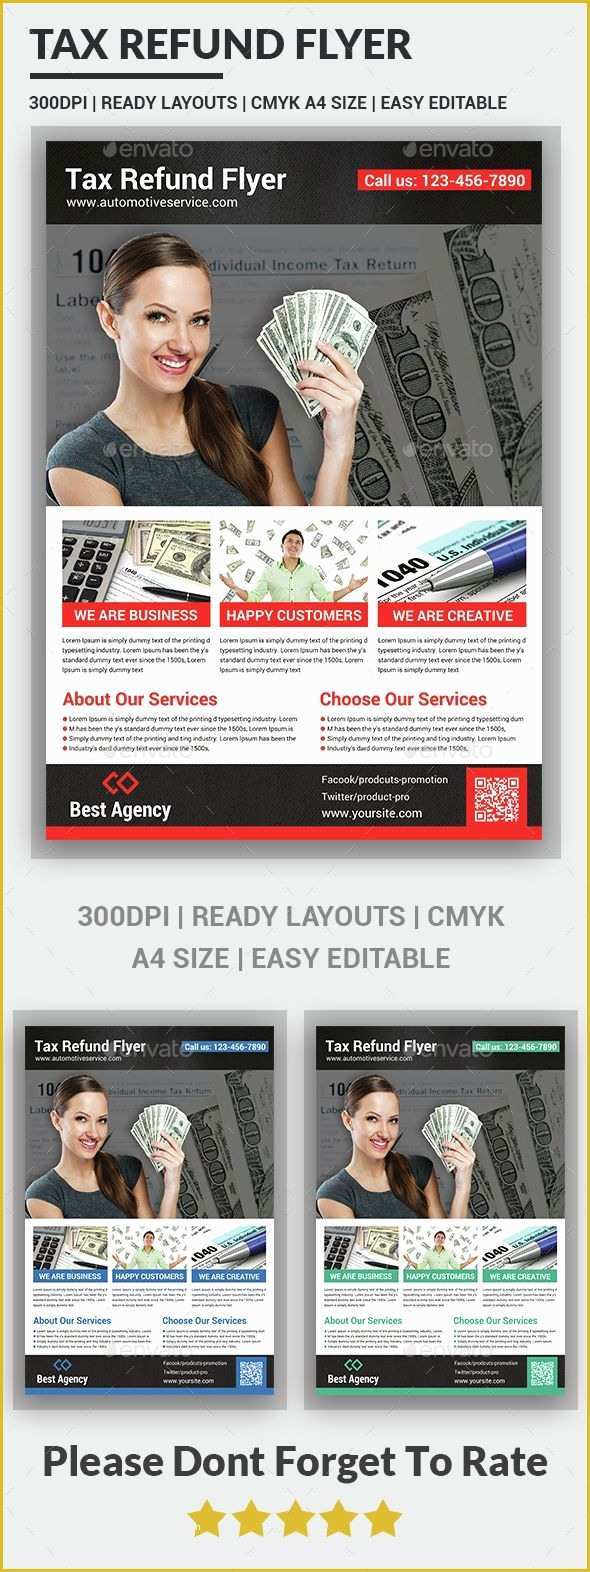 Free Tax Preparation Flyers Templates Of Tax Refund Flyer Template In E Tax Flyers